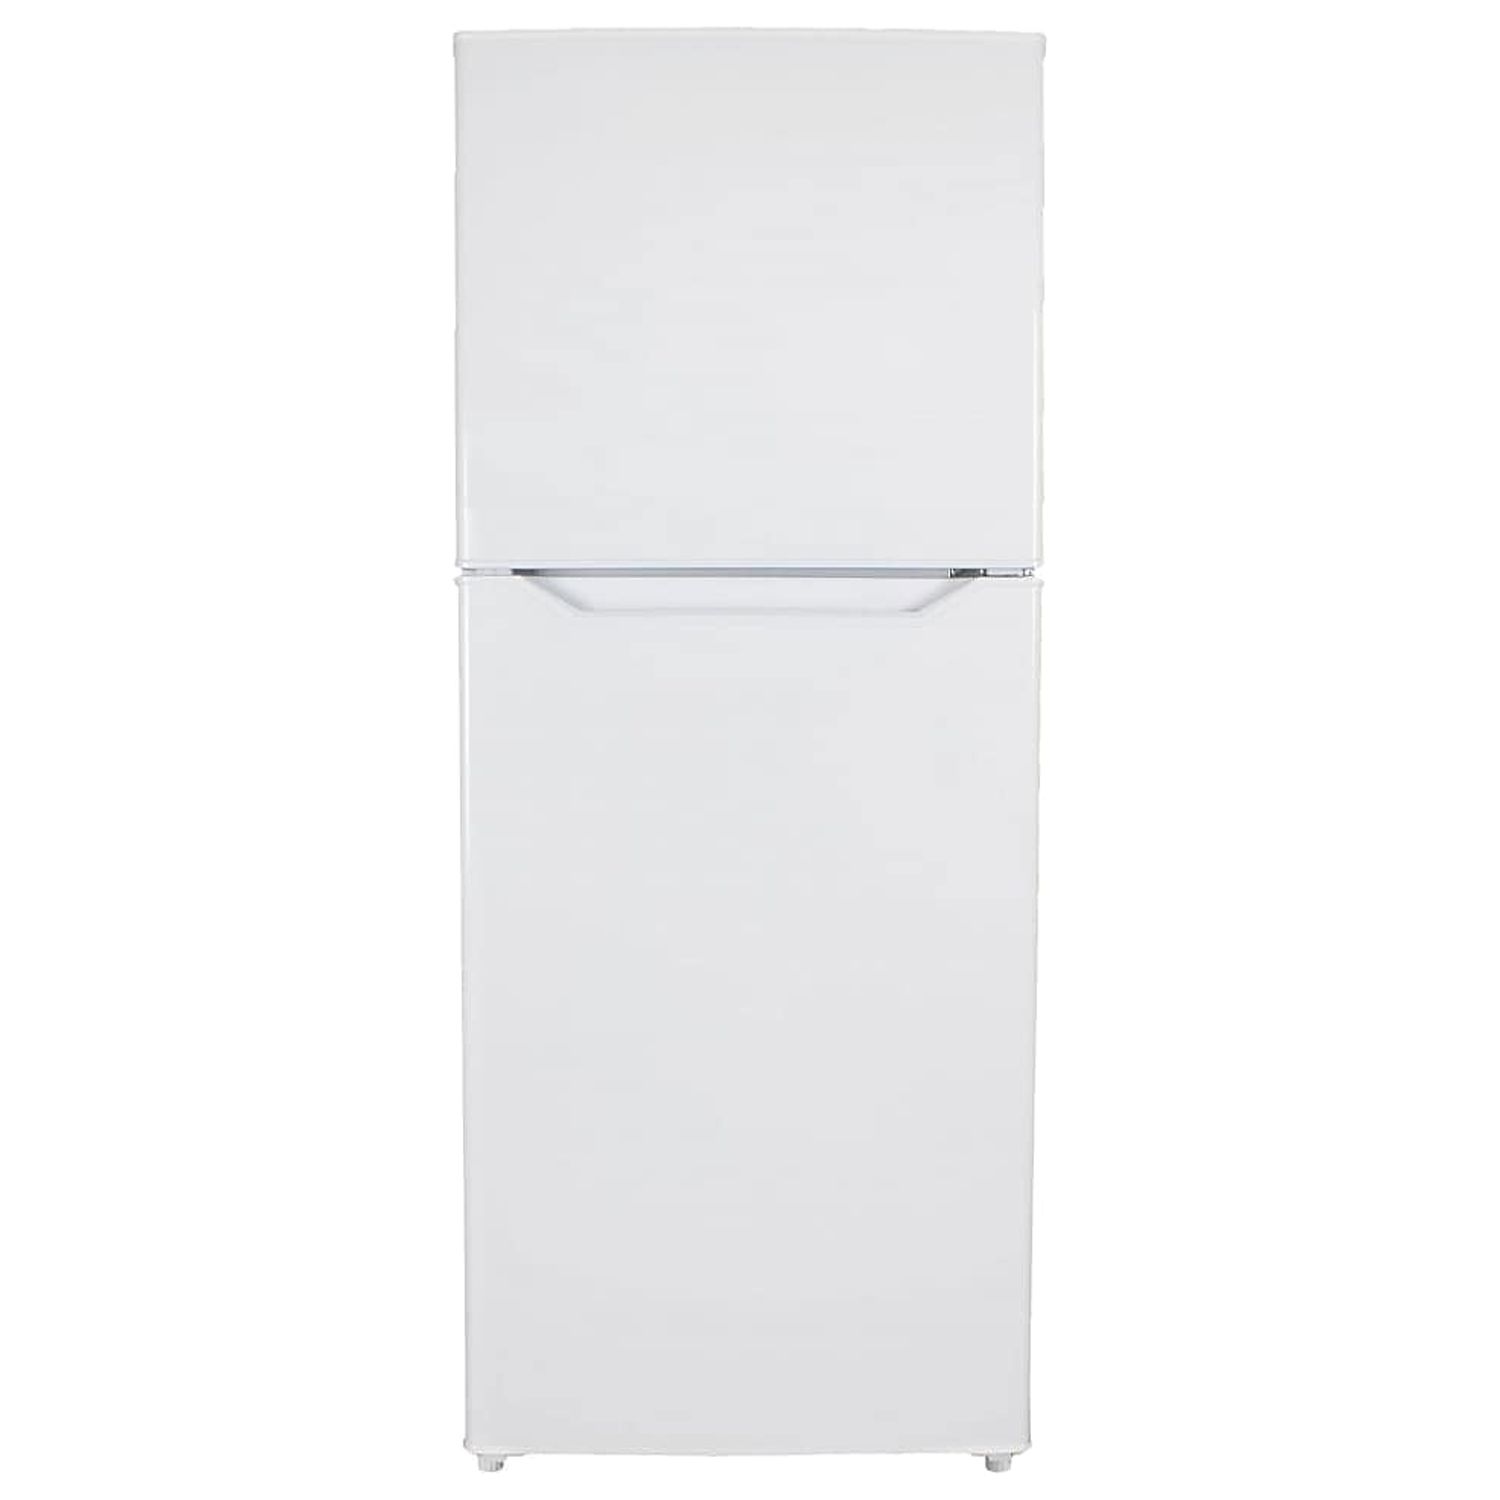 Danby 10.1 cu. ft. Apartment Size Refrigerator, White - image 5 of 9